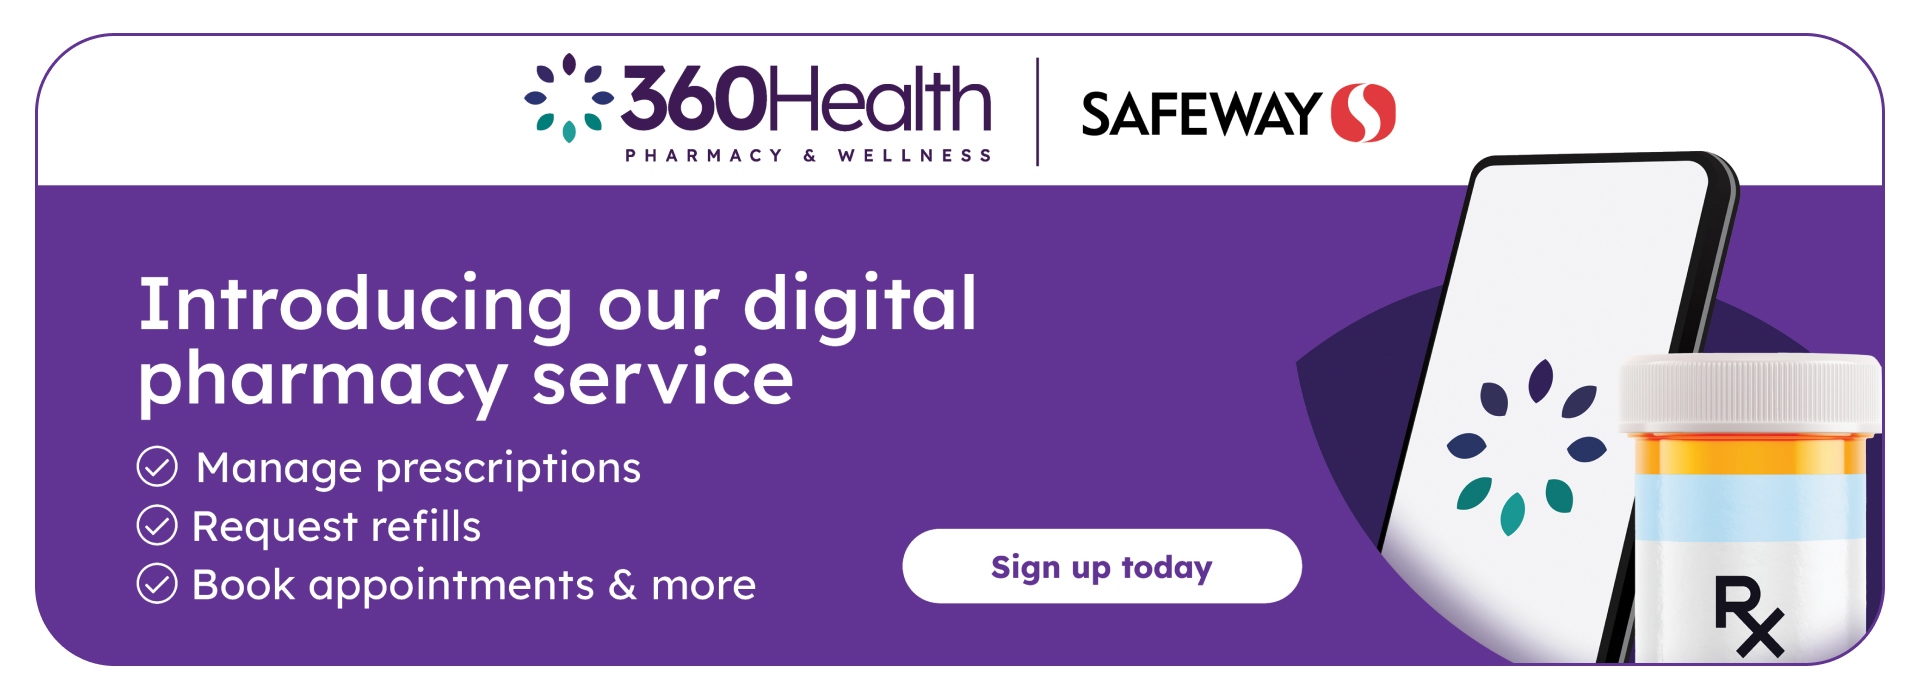 Introducing our digital pharmacy service